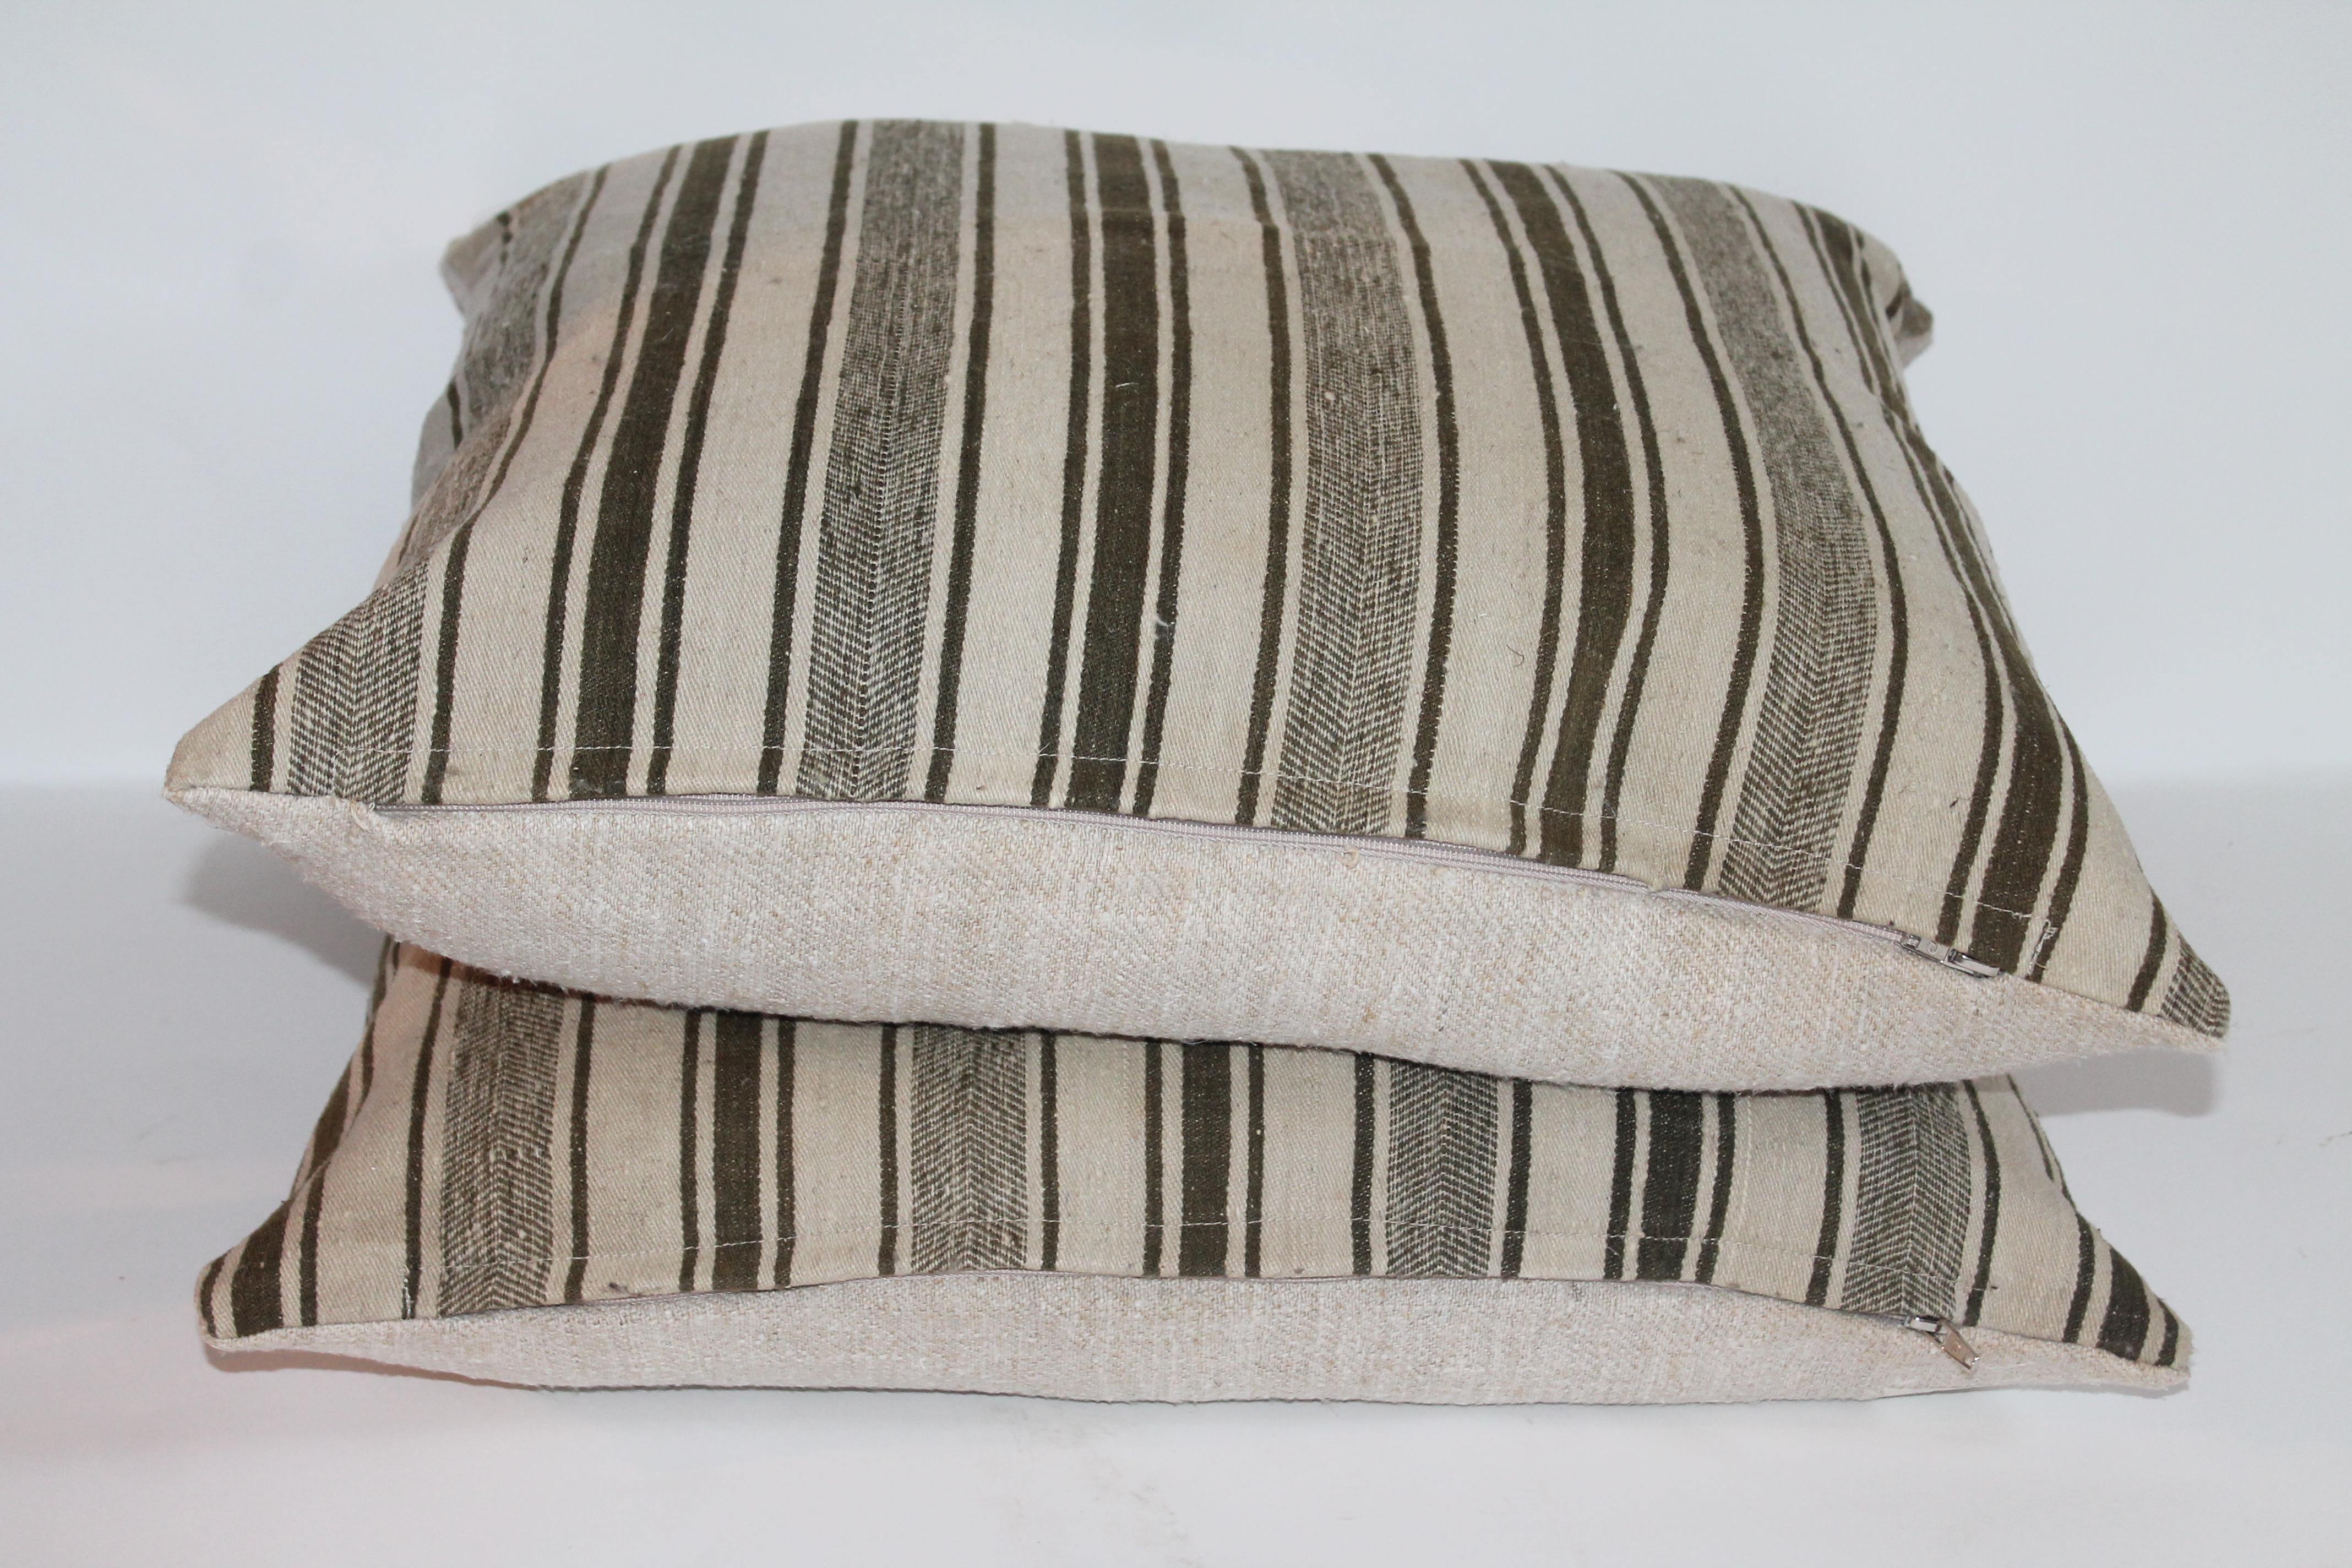  19Thc Striped Wool Ticking Pillows, Pair In Excellent Condition For Sale In Los Angeles, CA